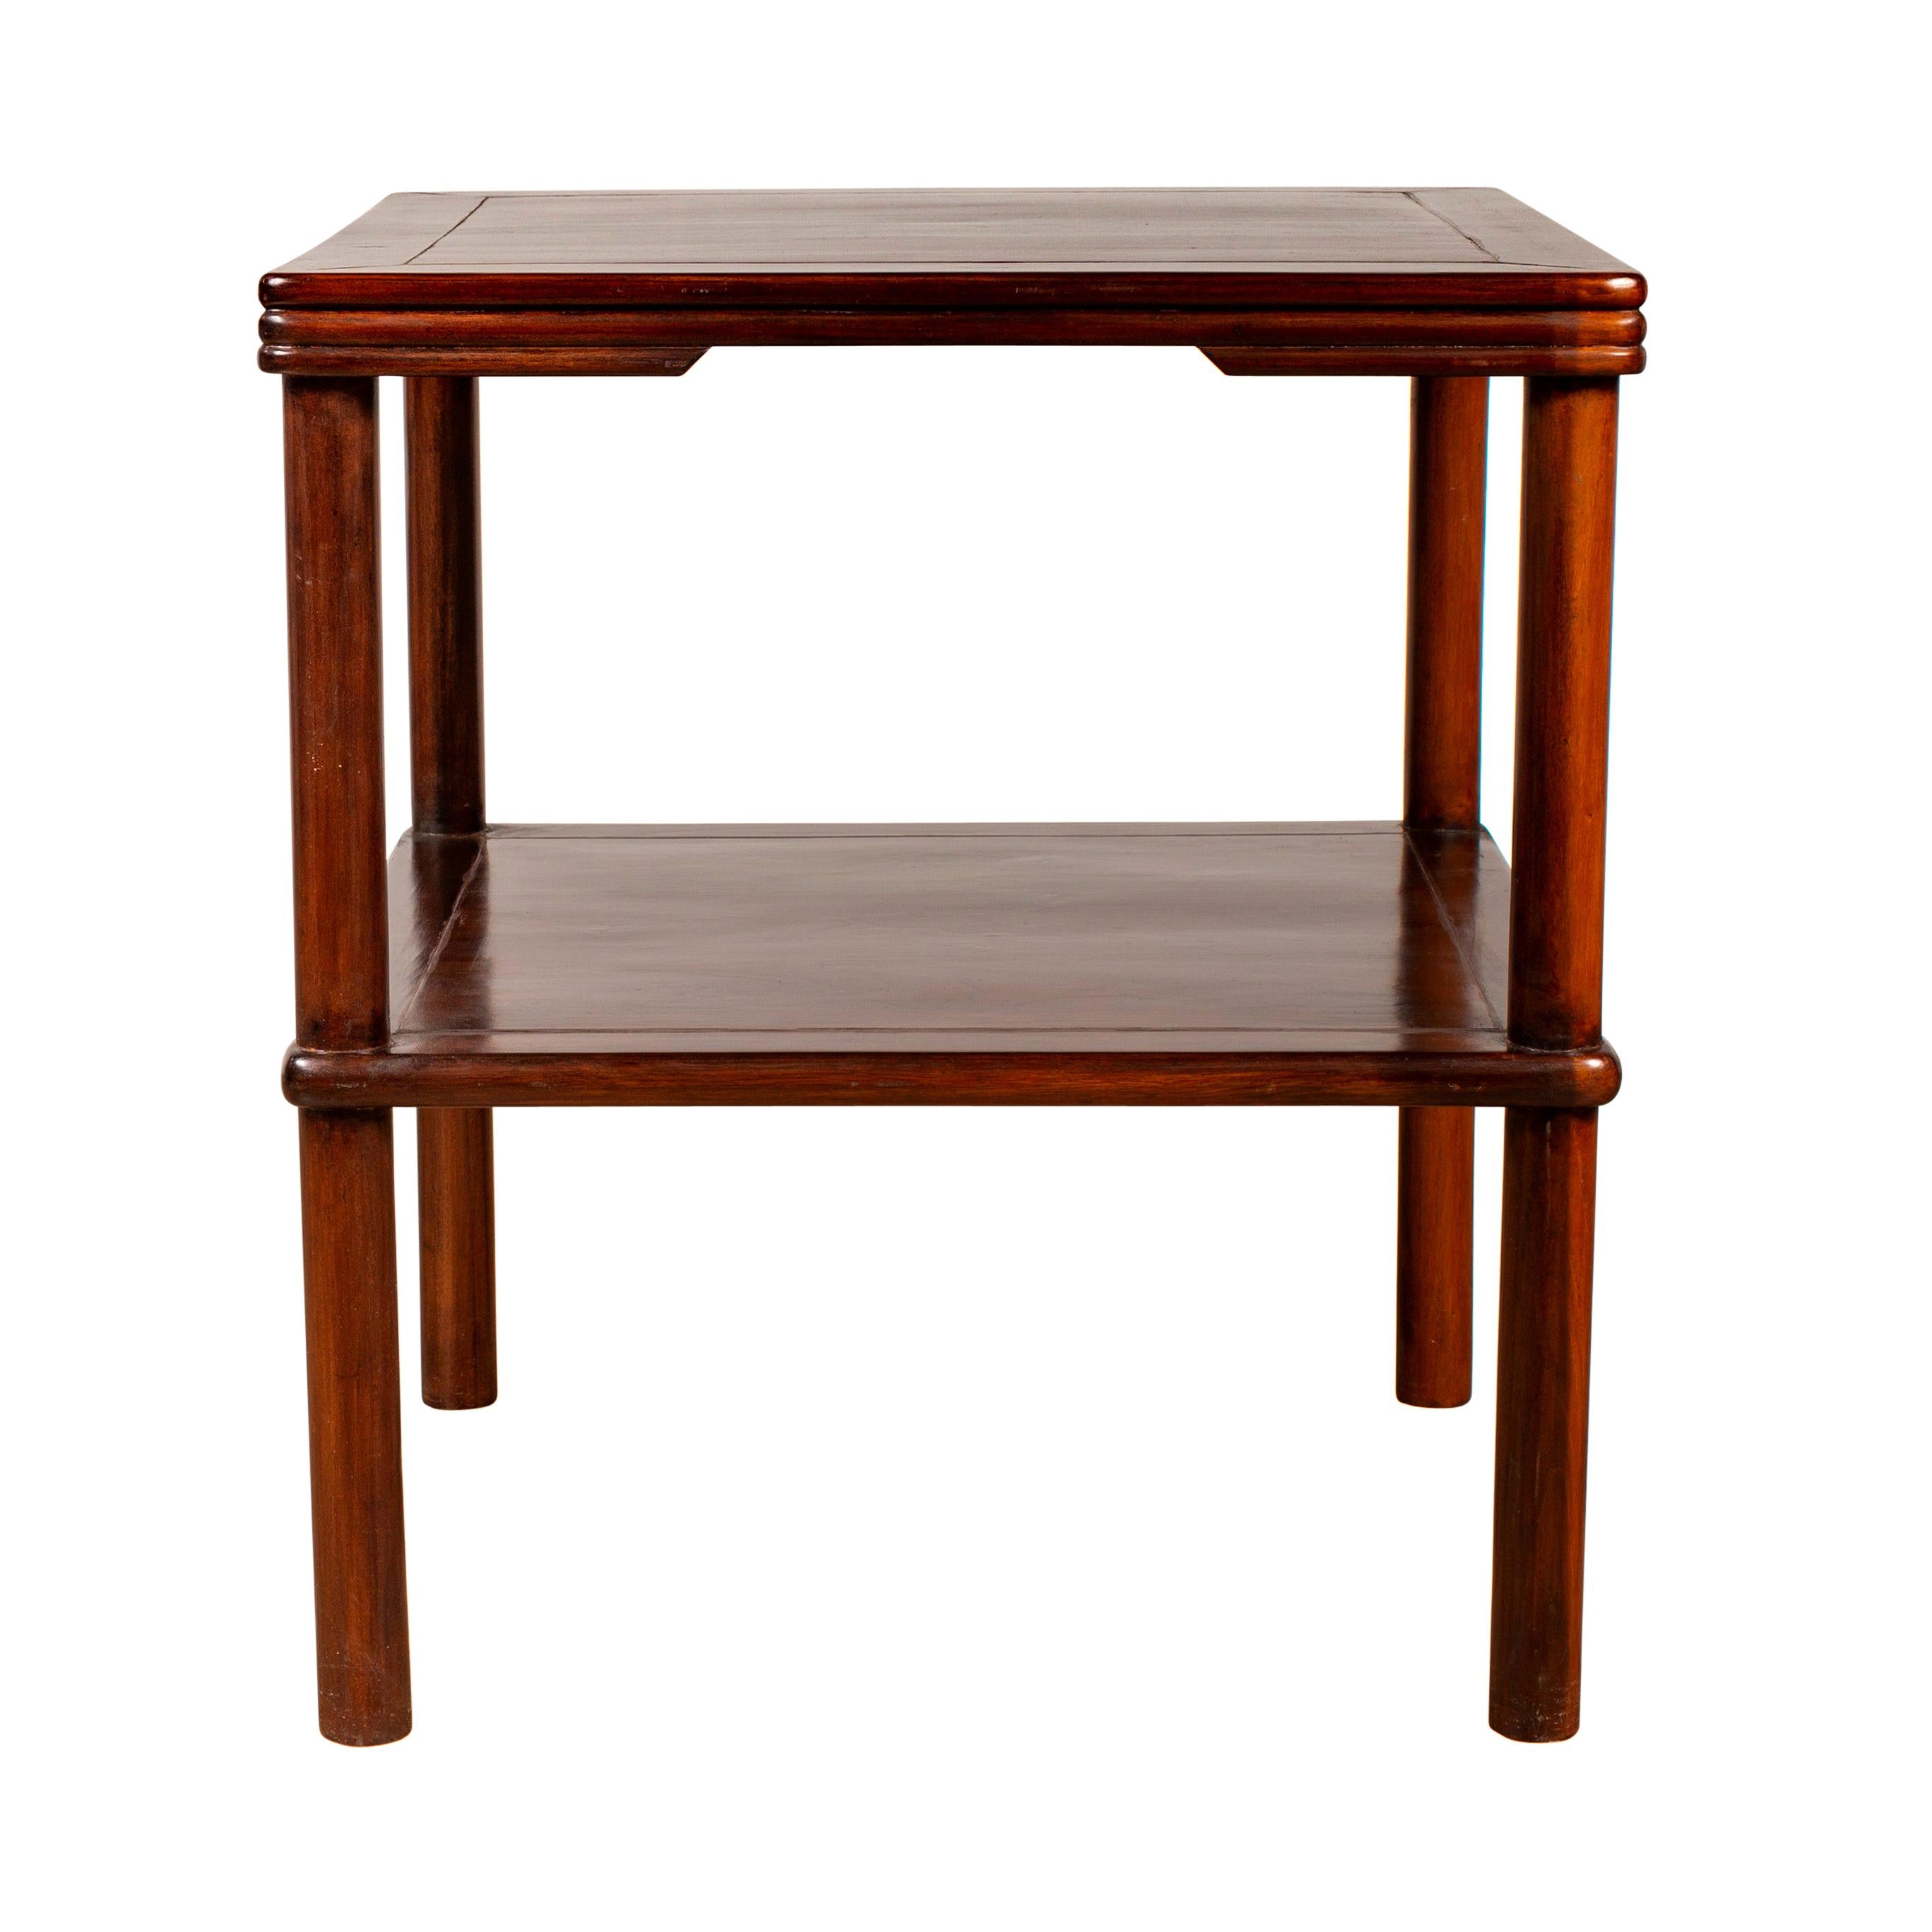 Chinese Vintage Midcentury Square-Shaped Side Table with Lower Shelf For Sale